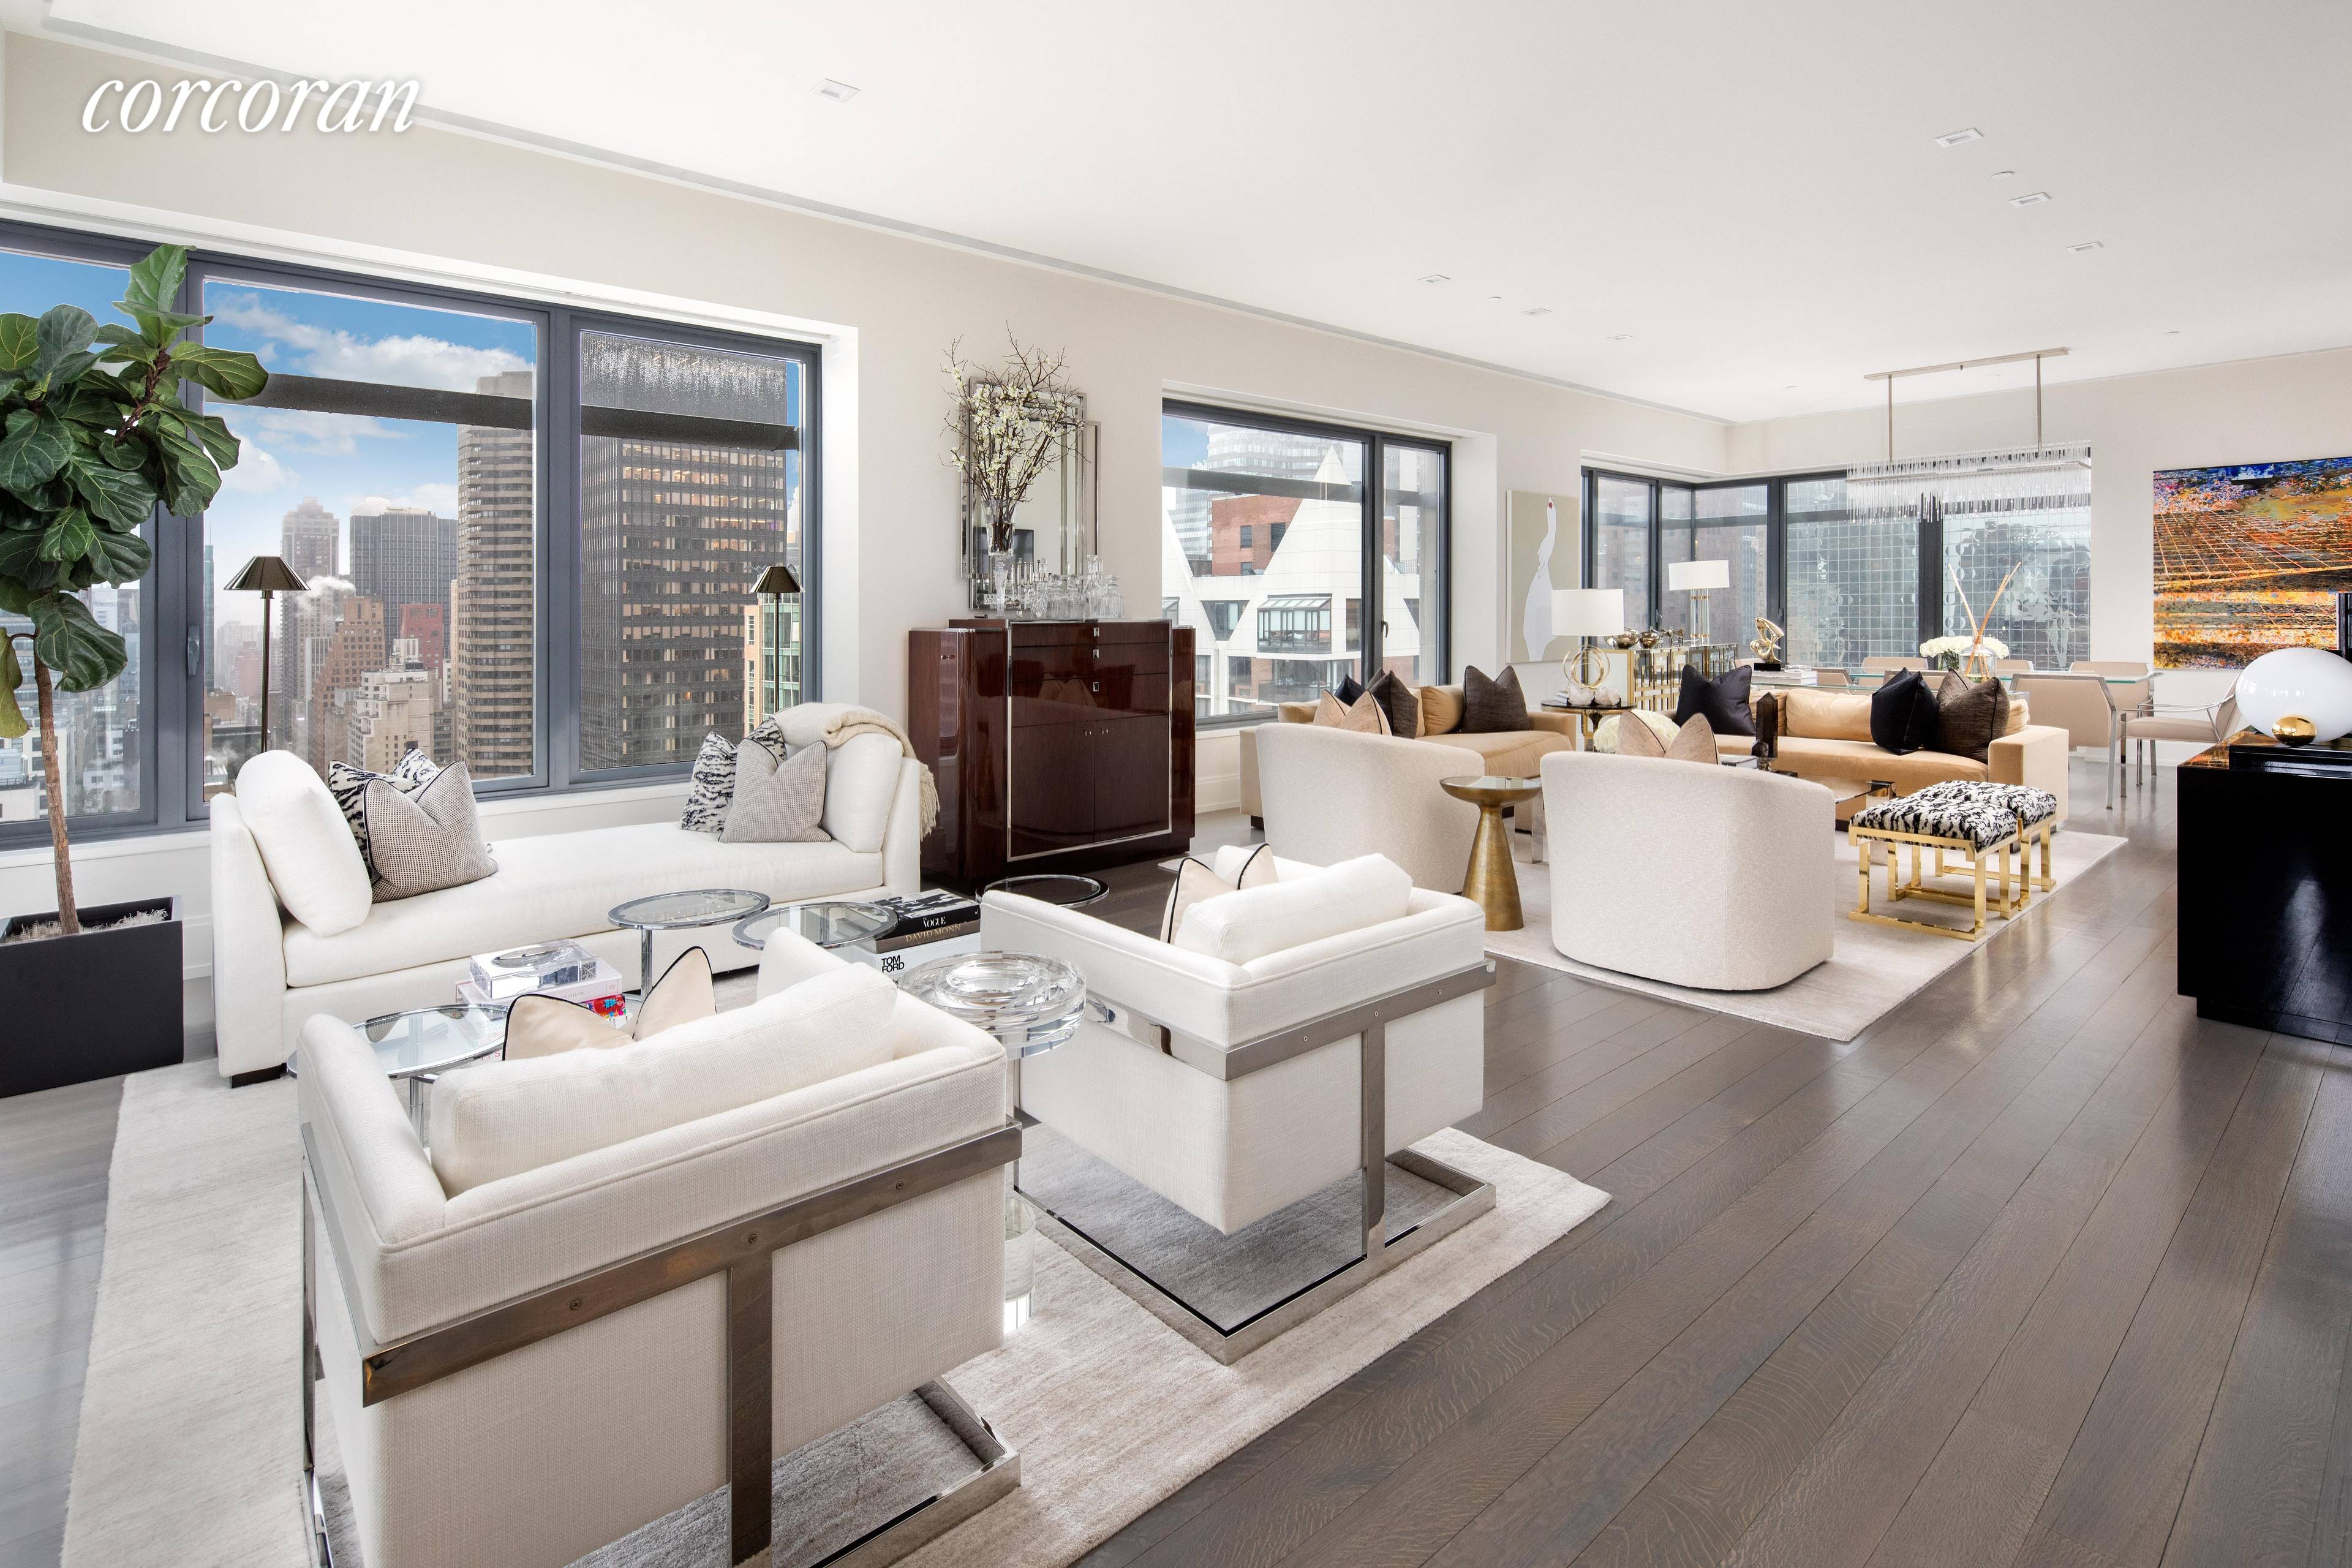 Experience exceptional living and bask in spectacular 360 degree views from this 26th full floor Penthouse condominium at 301 East 50th Street.